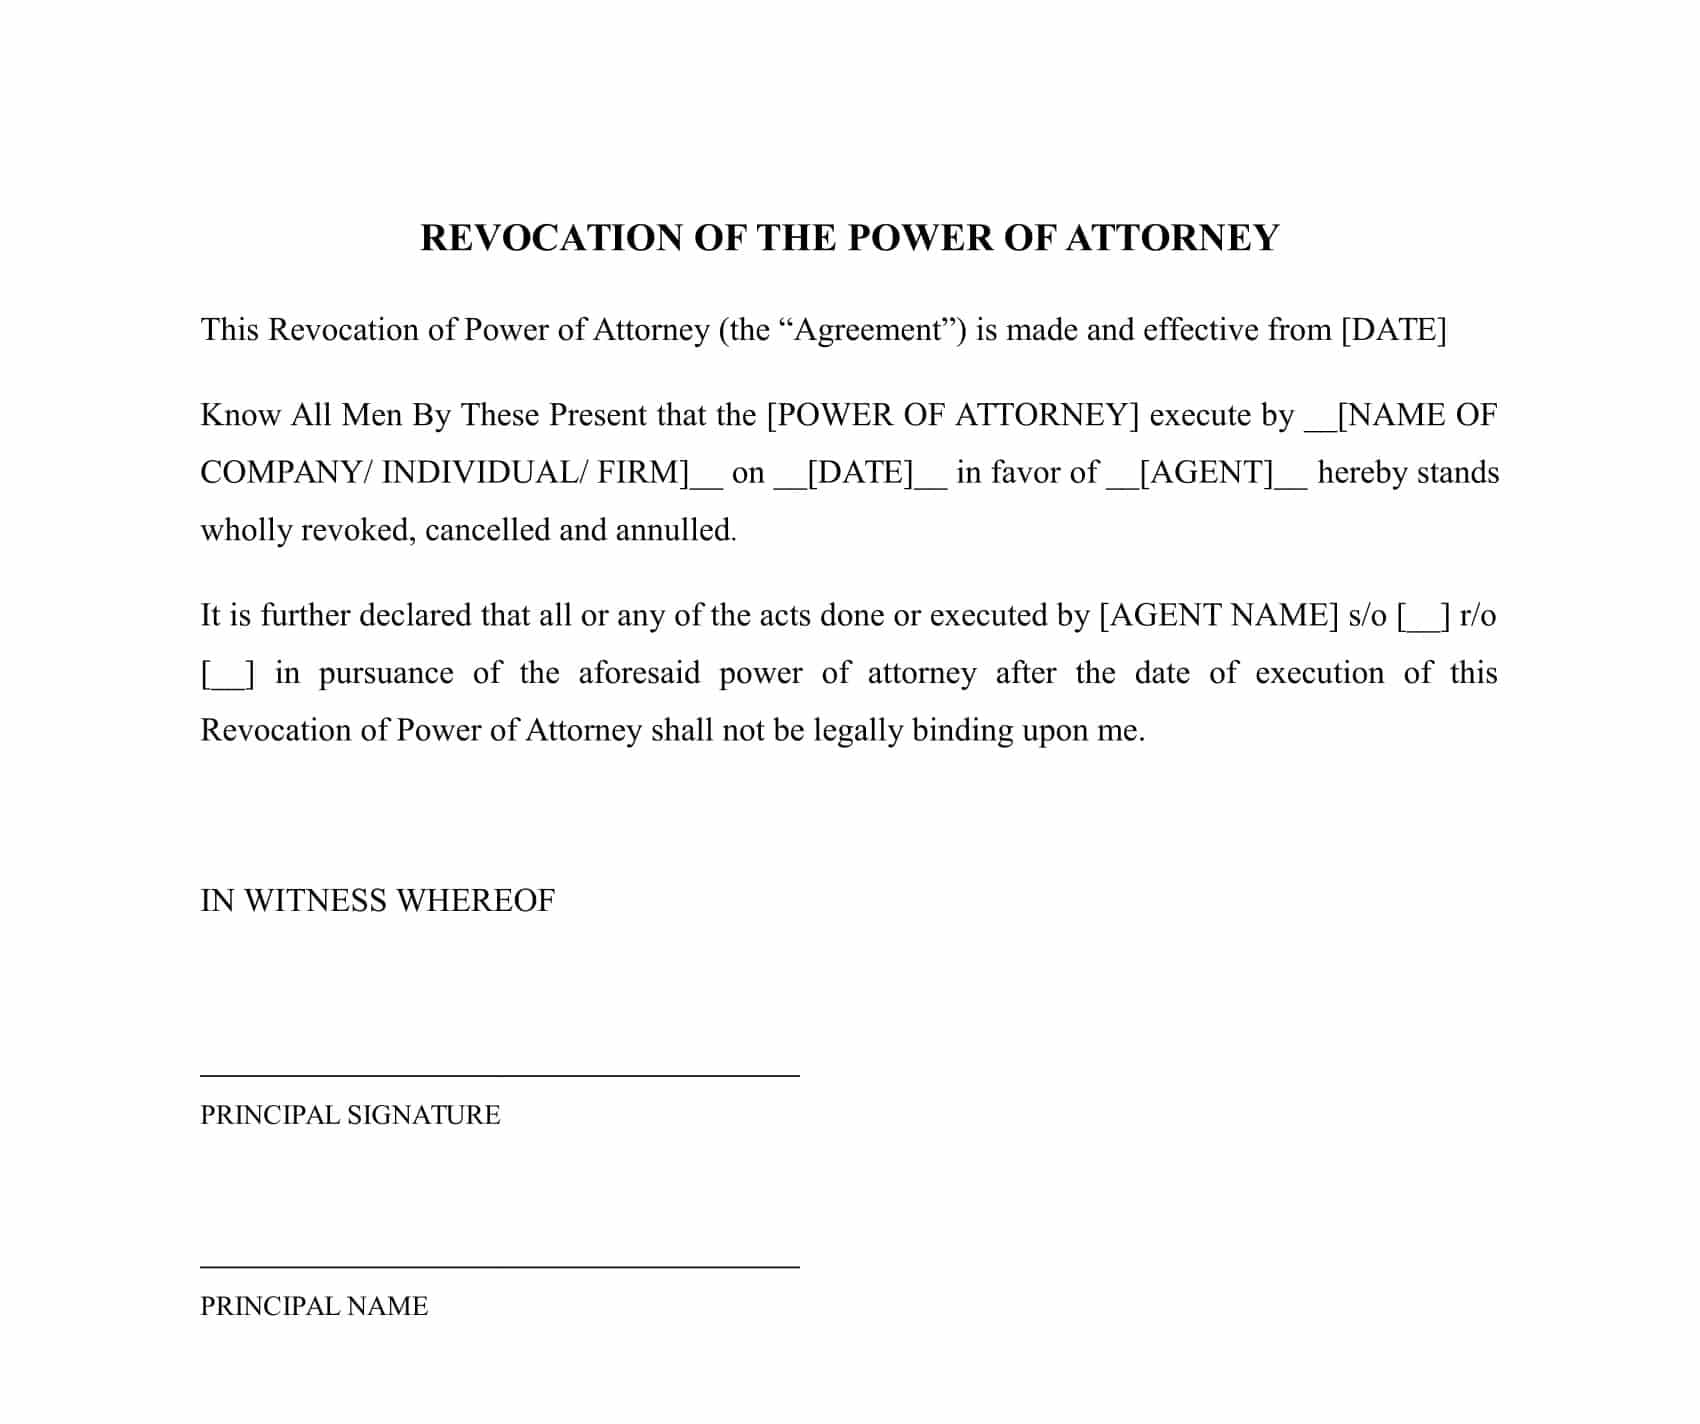 Revocation of the Power of Attorney